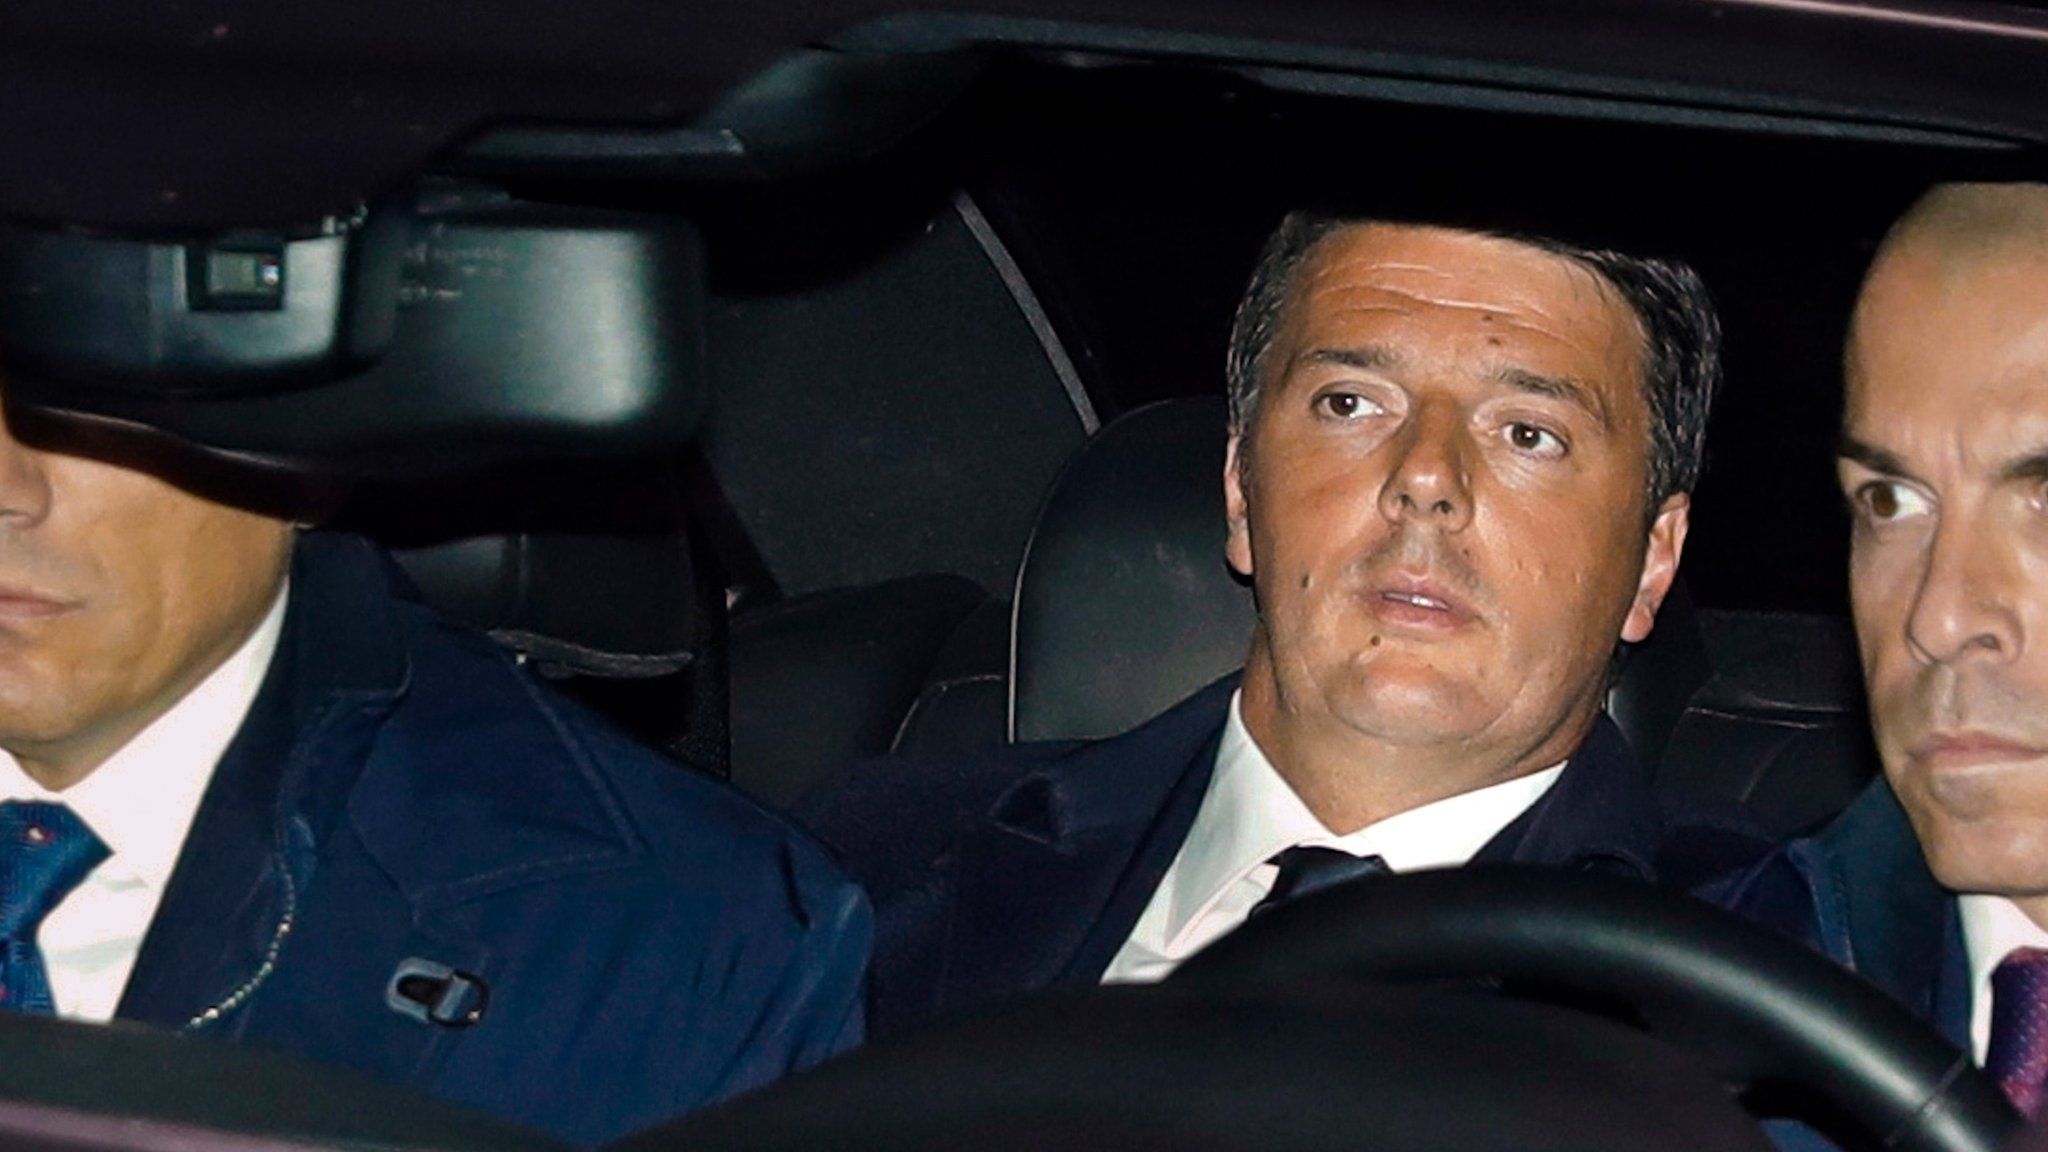 Matteo Renzi arriving at the presidential palace on 7 December 2016